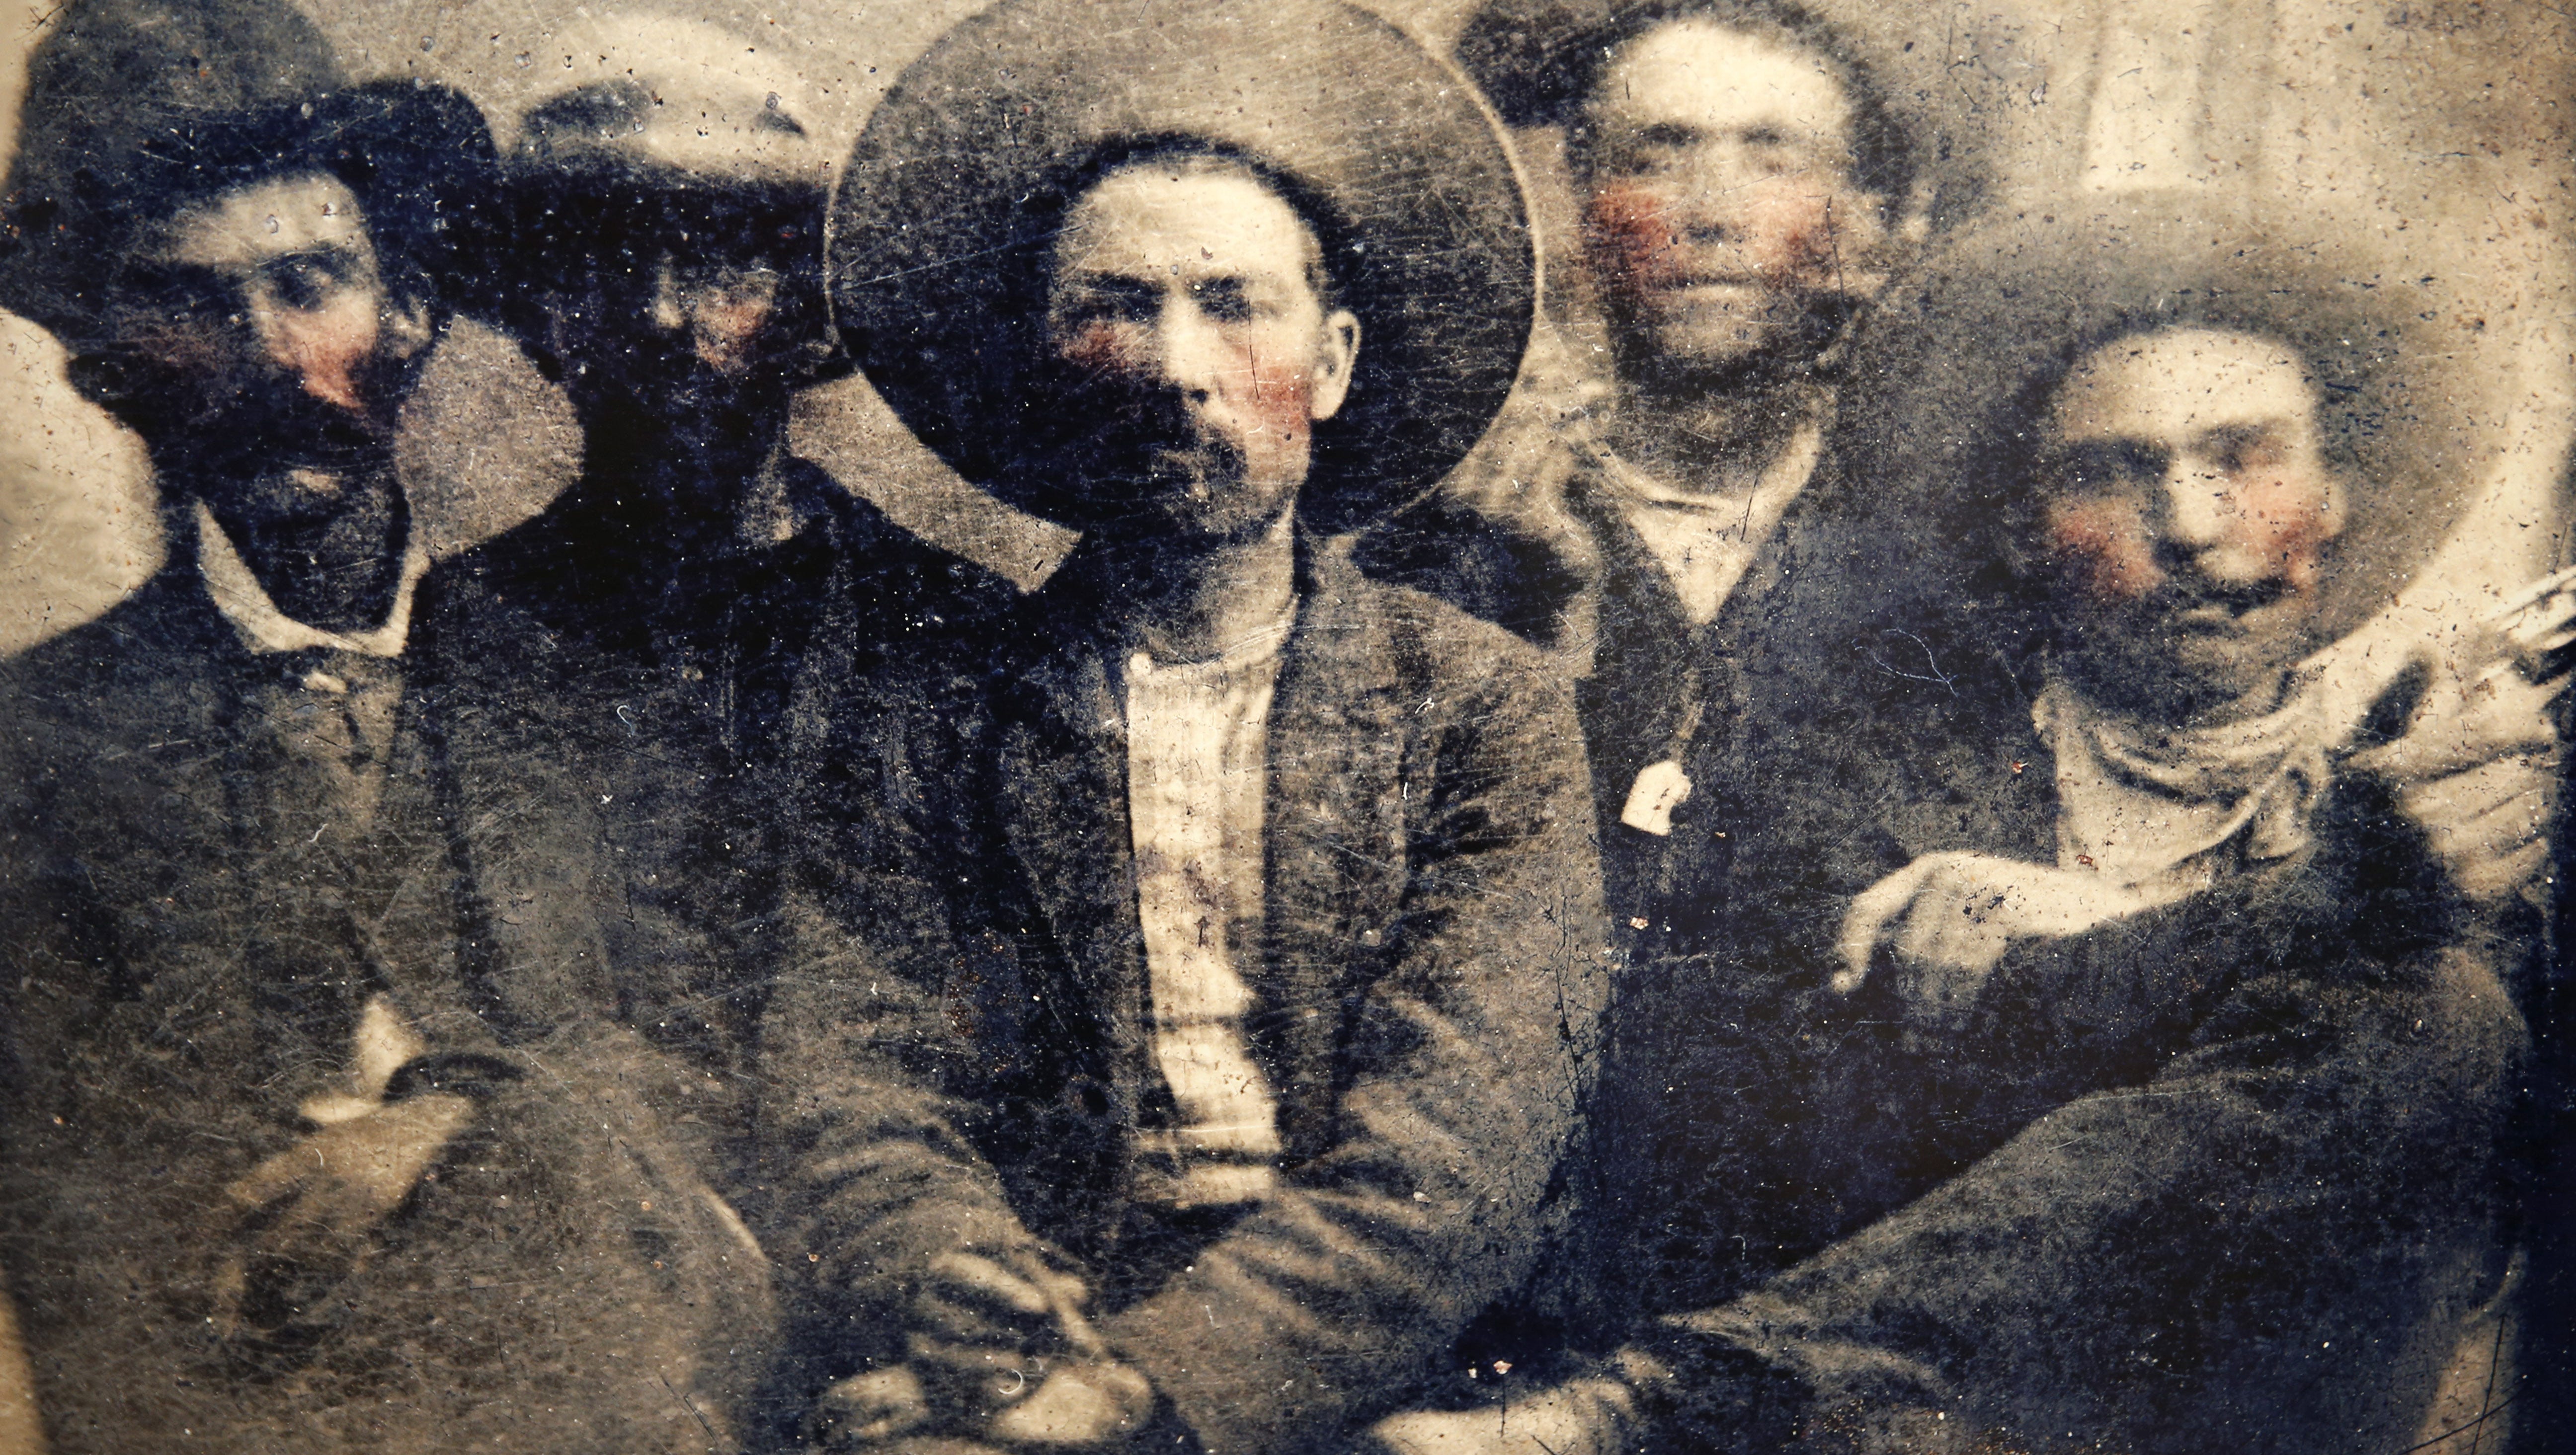 billy the kid and gang